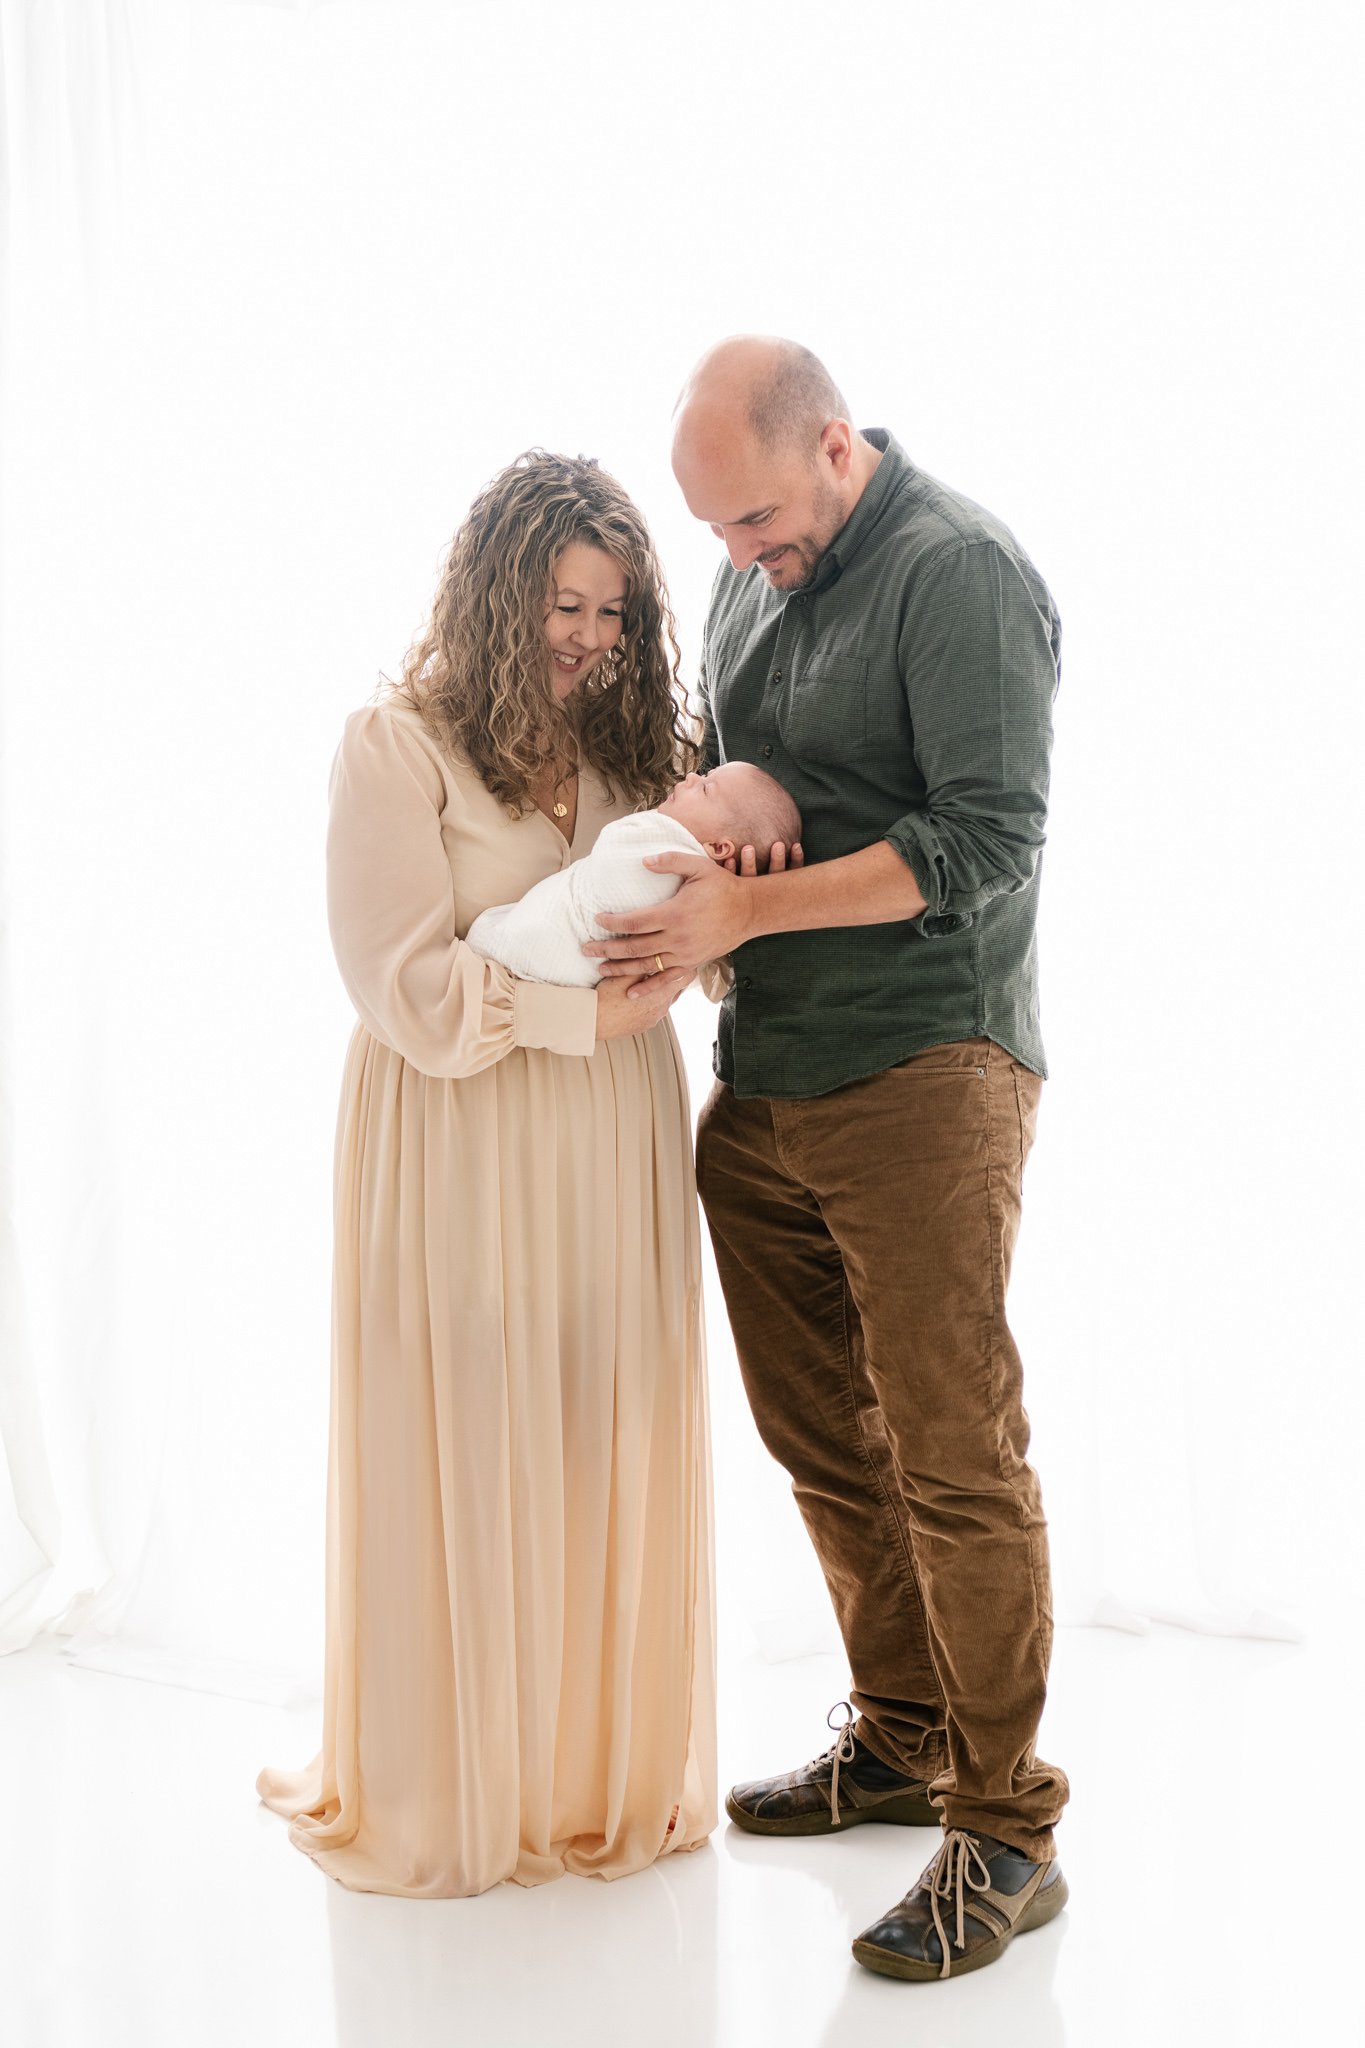  Family portraits are perfect for a professional gallery wall hanging in your home by Nicole Hawkins Photography. newborn baby #NicoleHawkinsPhotography #NicoleHawkinsFamily #Newborns #MaplewoodNJ #studiofamilyportraits #modernfamilyportraits 